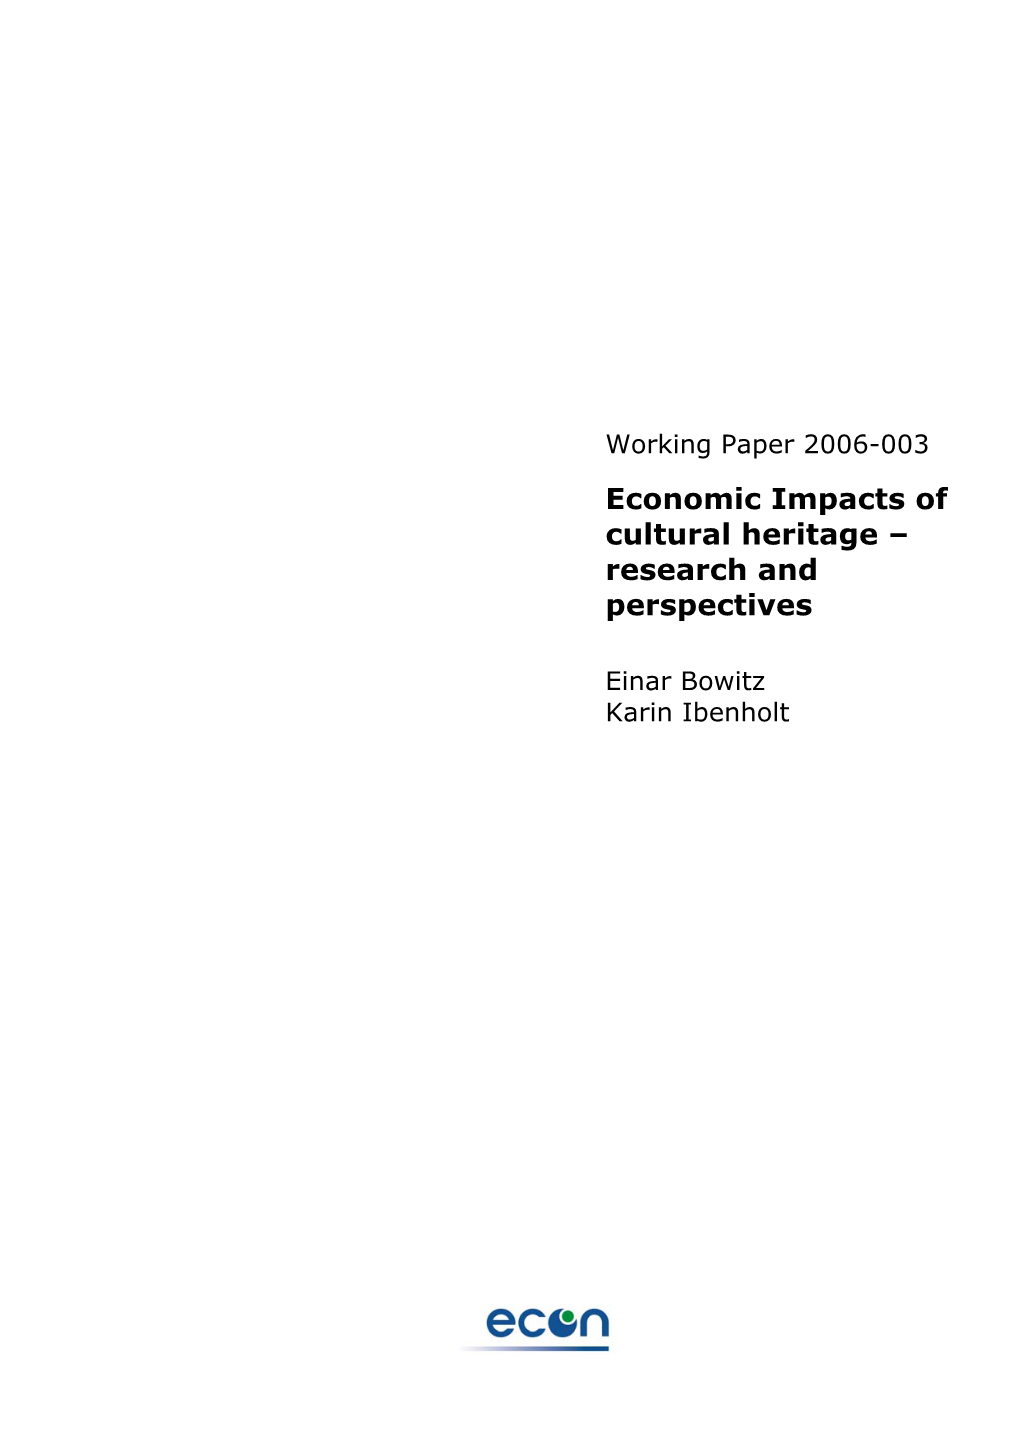 Economic Impacts of Cultural Heritage – Research and Perspectives